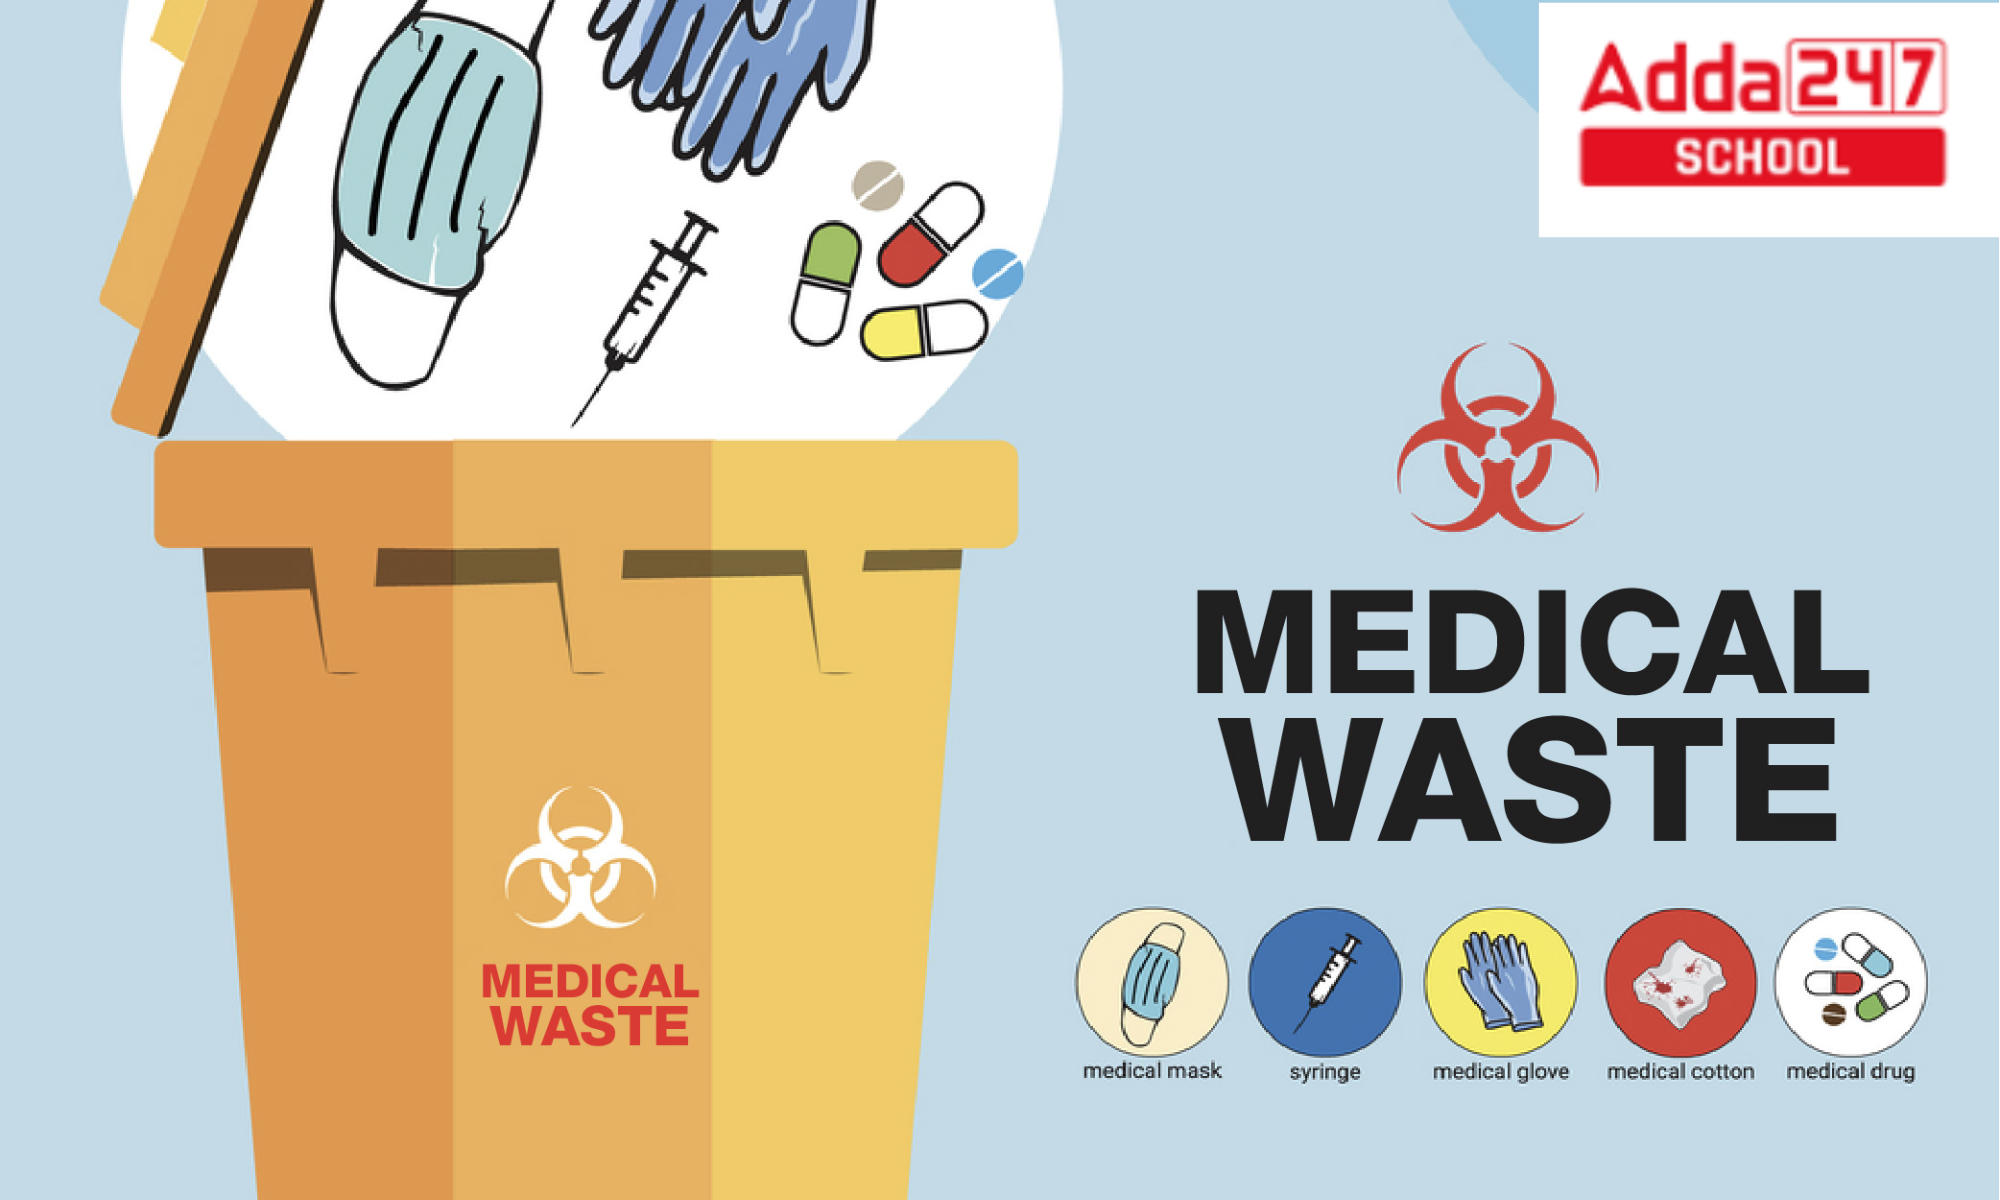 assignment on biomedical waste management